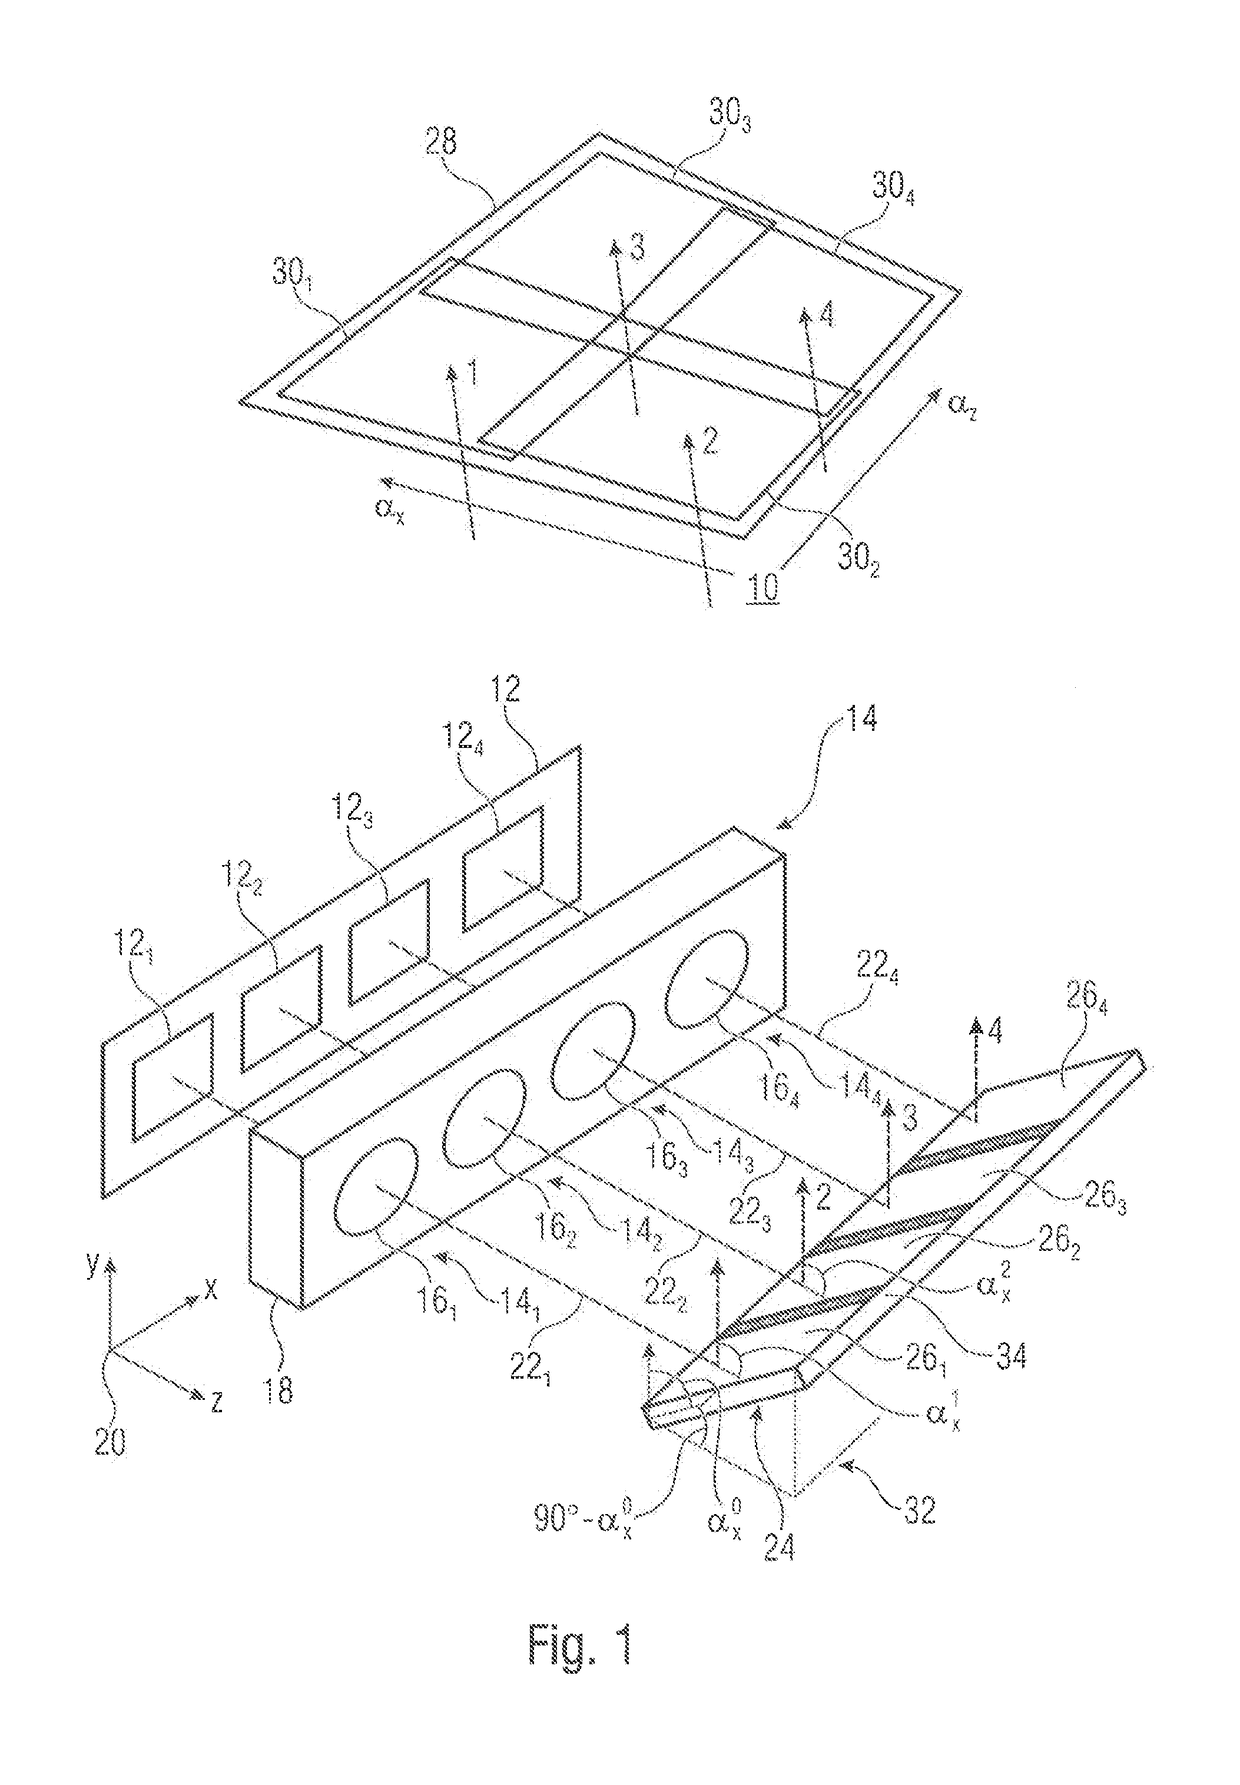 Multi-aperture imaging device having a beam-deflecting device comprising reflecting facets